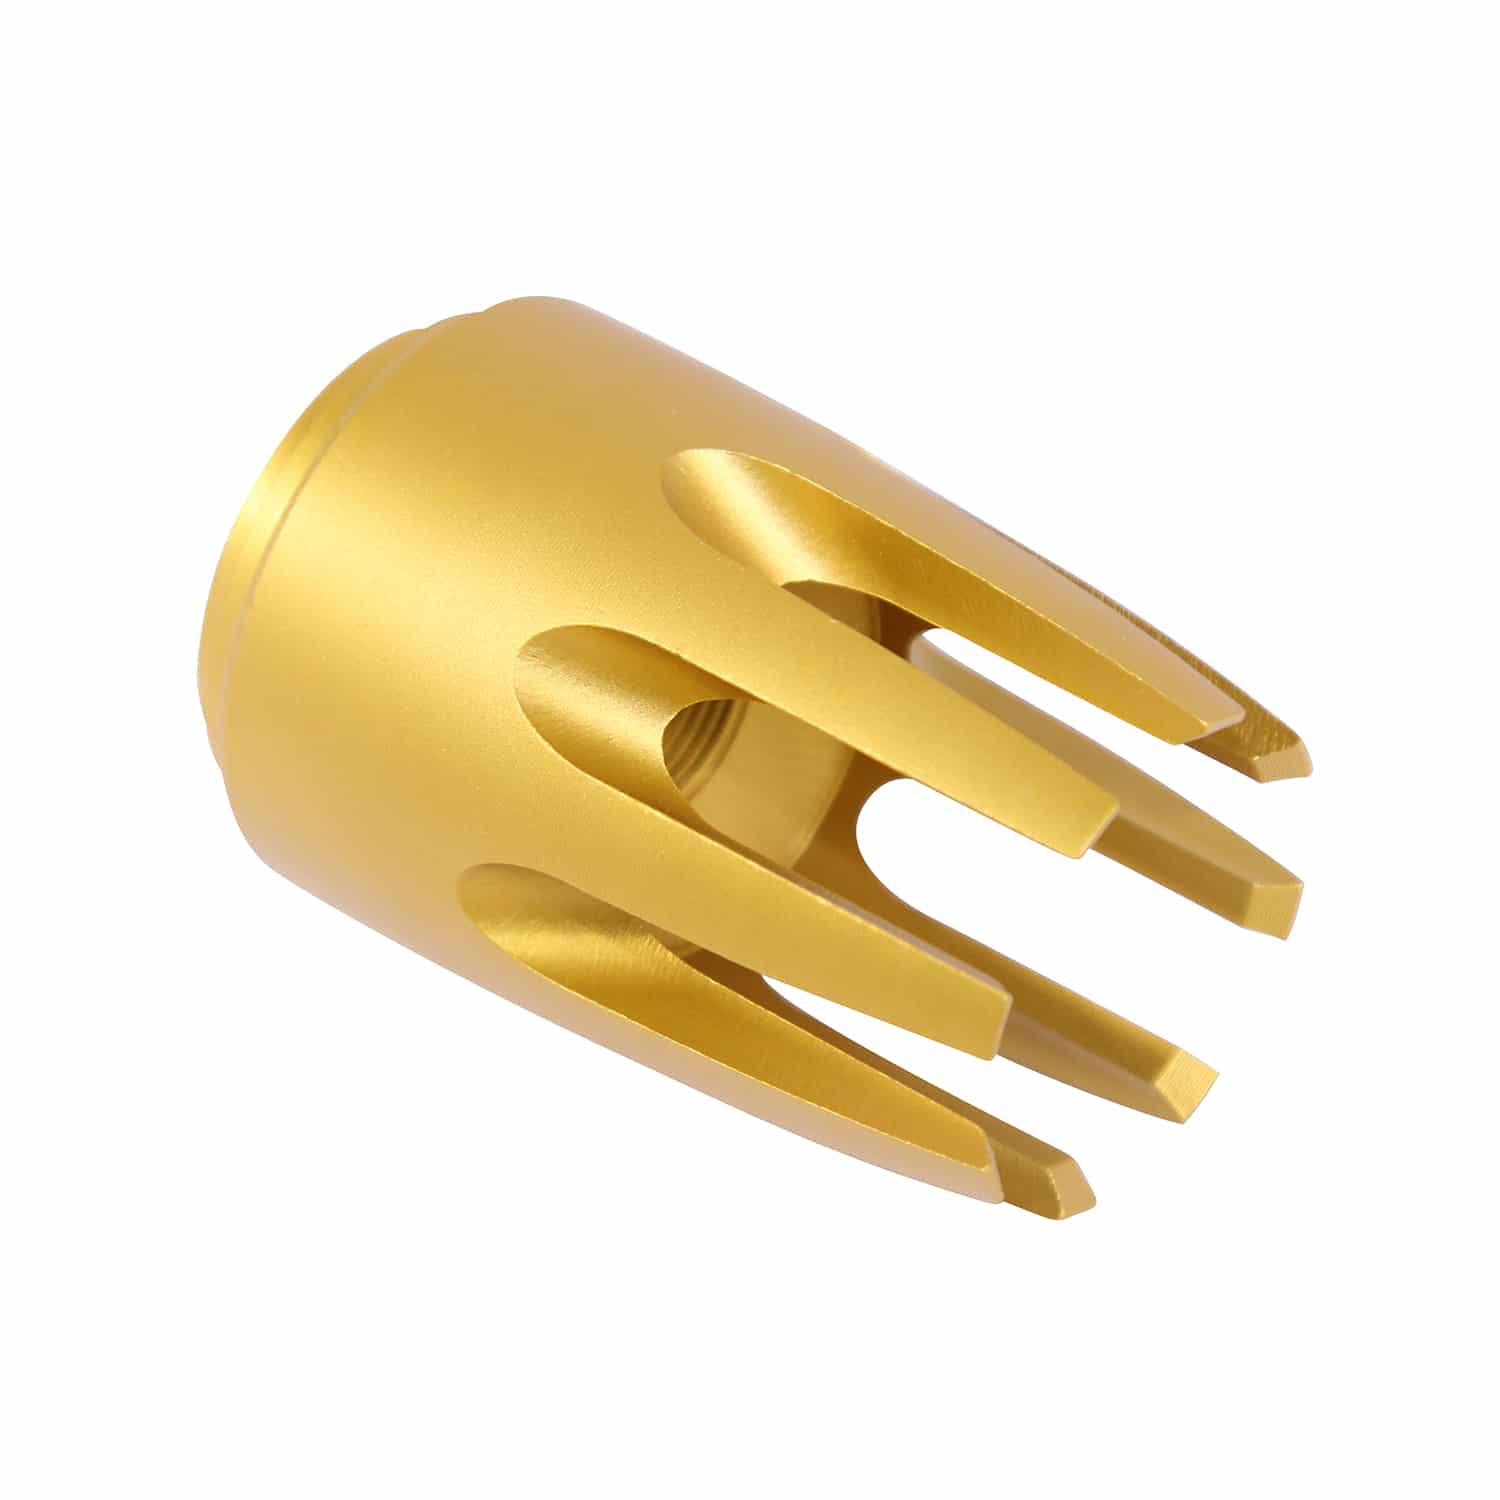 AR15 'Claw' flash hider in striking anodized gold with multi-prong design